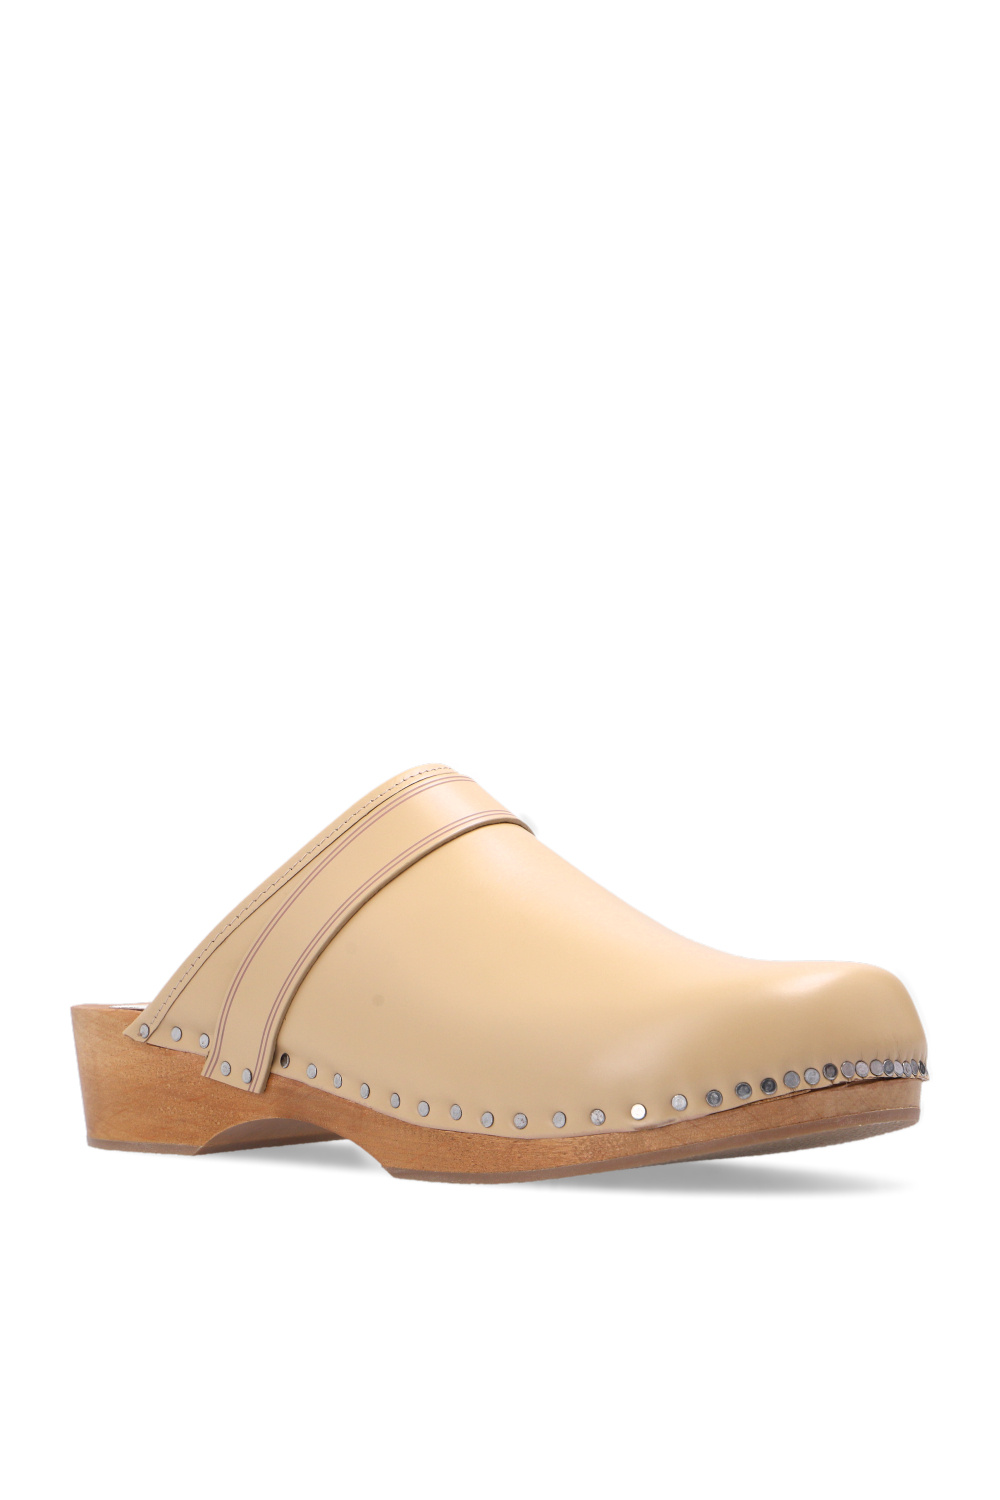 Thalie leather clogs